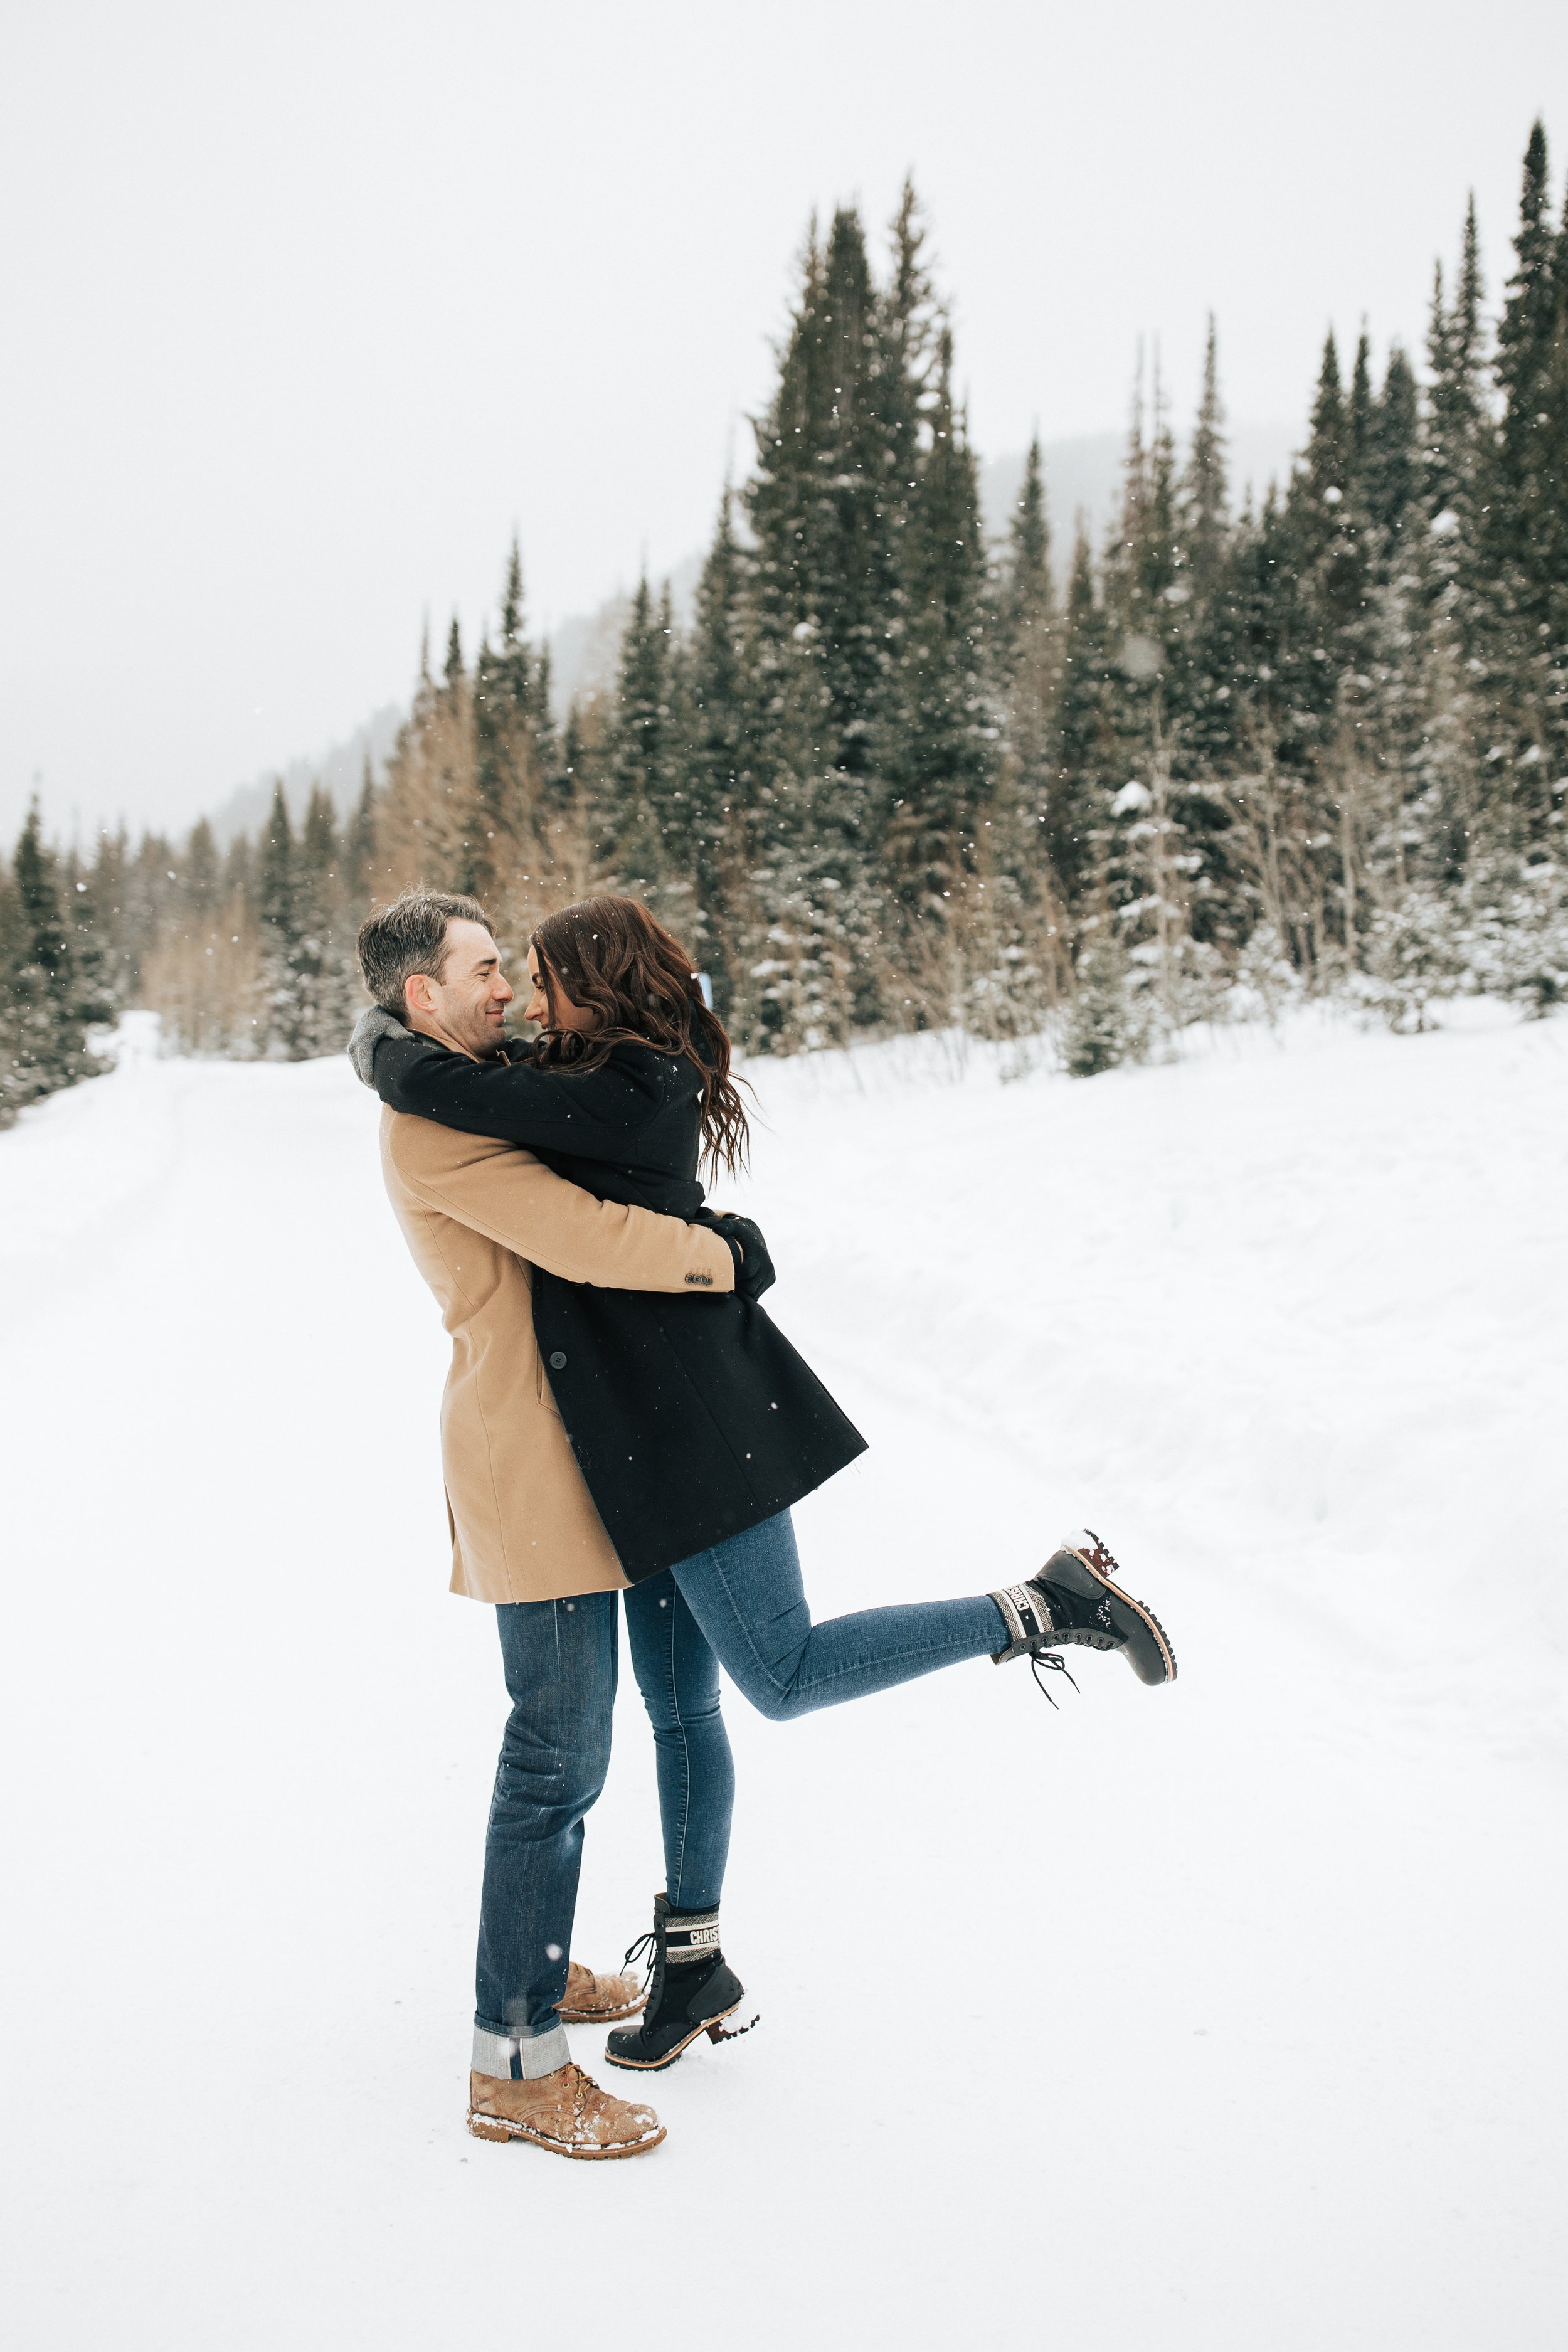  Winter photoshoot outfit inspo. Man and woman kiss in the snowy mountains wearing coats and beanies. Utah mountain engagement shoot in the winter. Park City, Utah photographer. #winter #engagements #engagementsession #utahphotoshoot #utahengagements